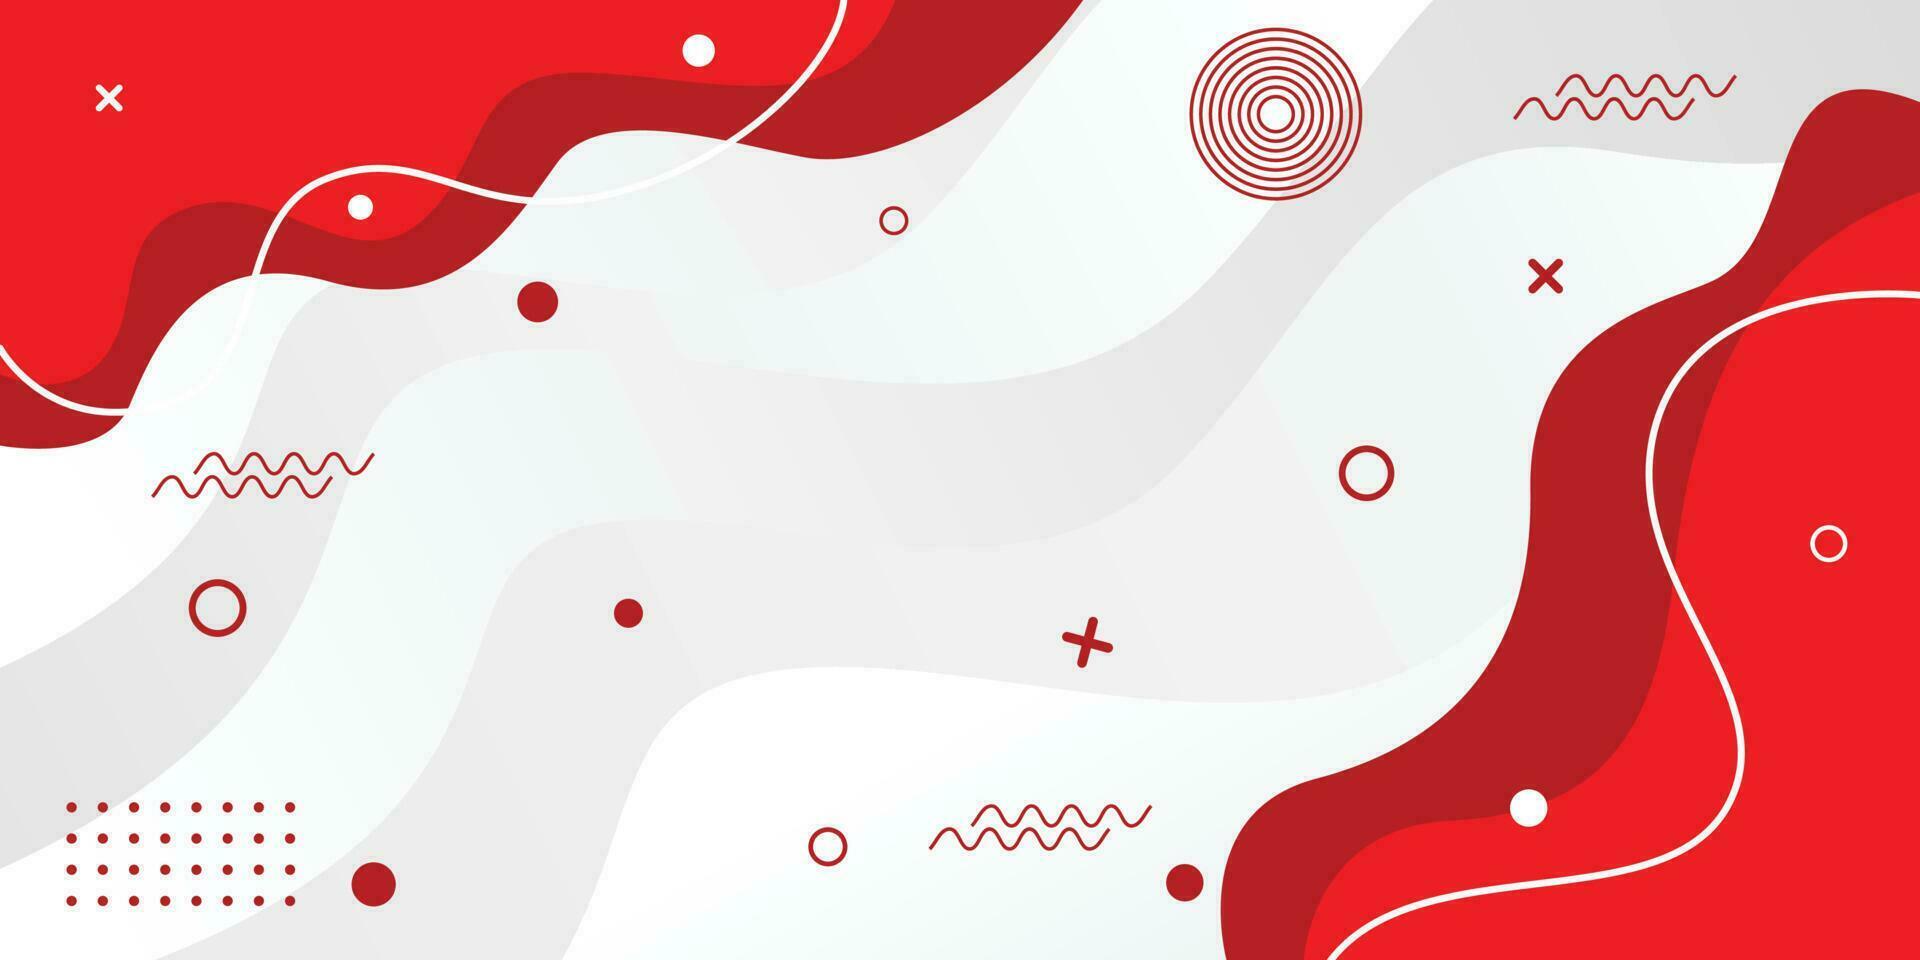 Red Waves Background With Lines vector